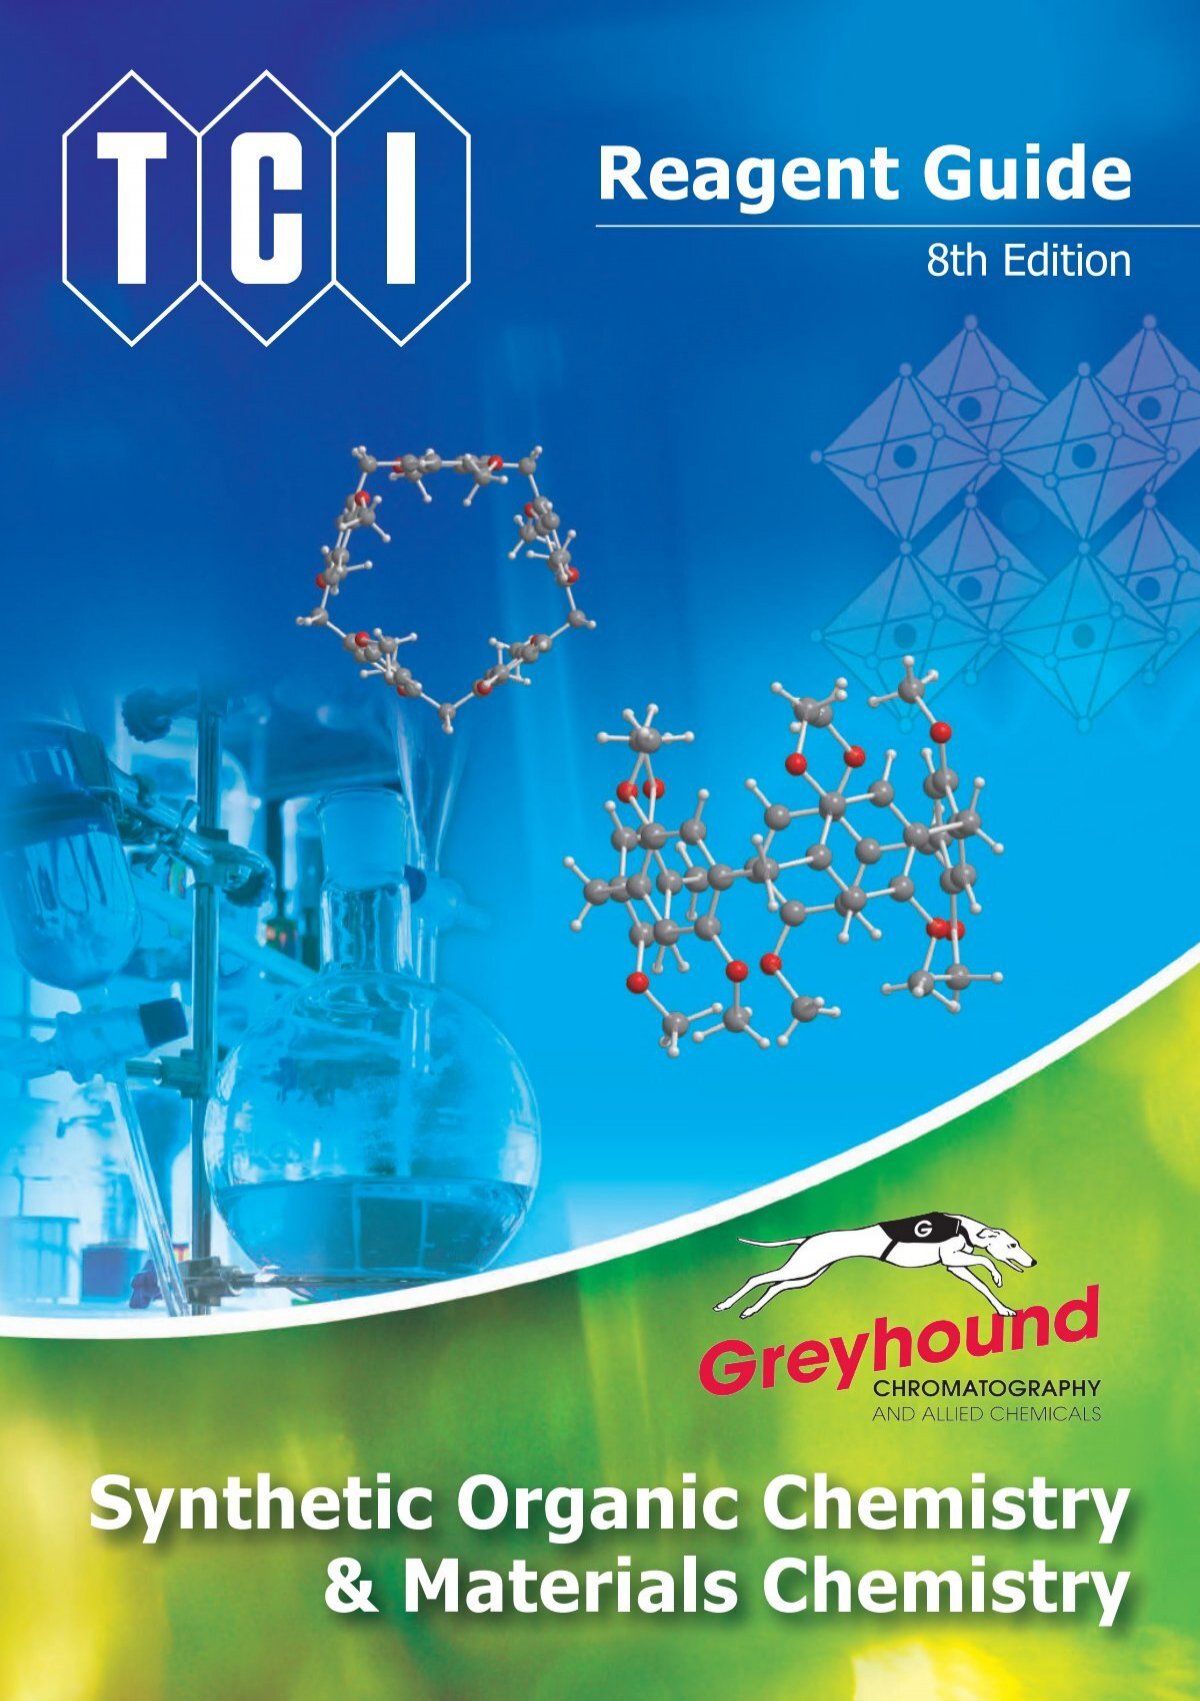 Tokyo Chemical Industries (TCI) Reagents Guide 8th Edition 